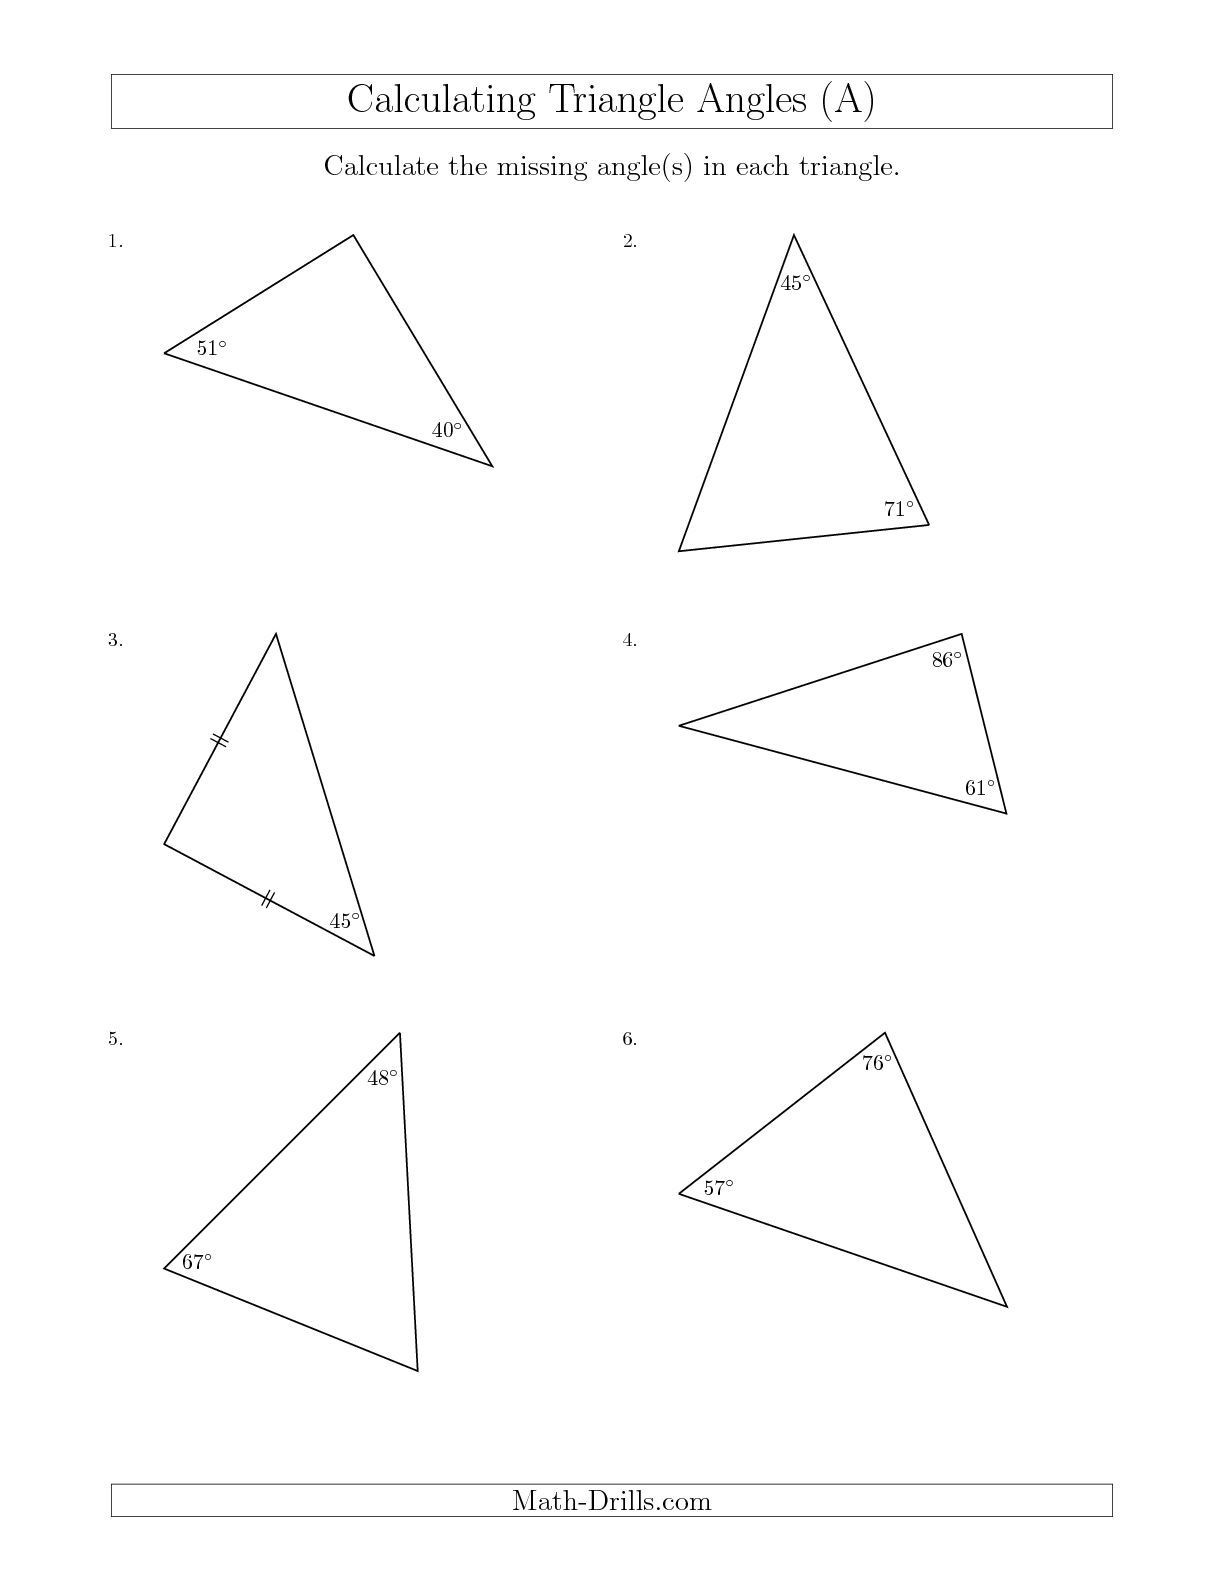 Angles In A Triangle Worksheet New Calculating Angles Of A Triangle Given the Other Angle